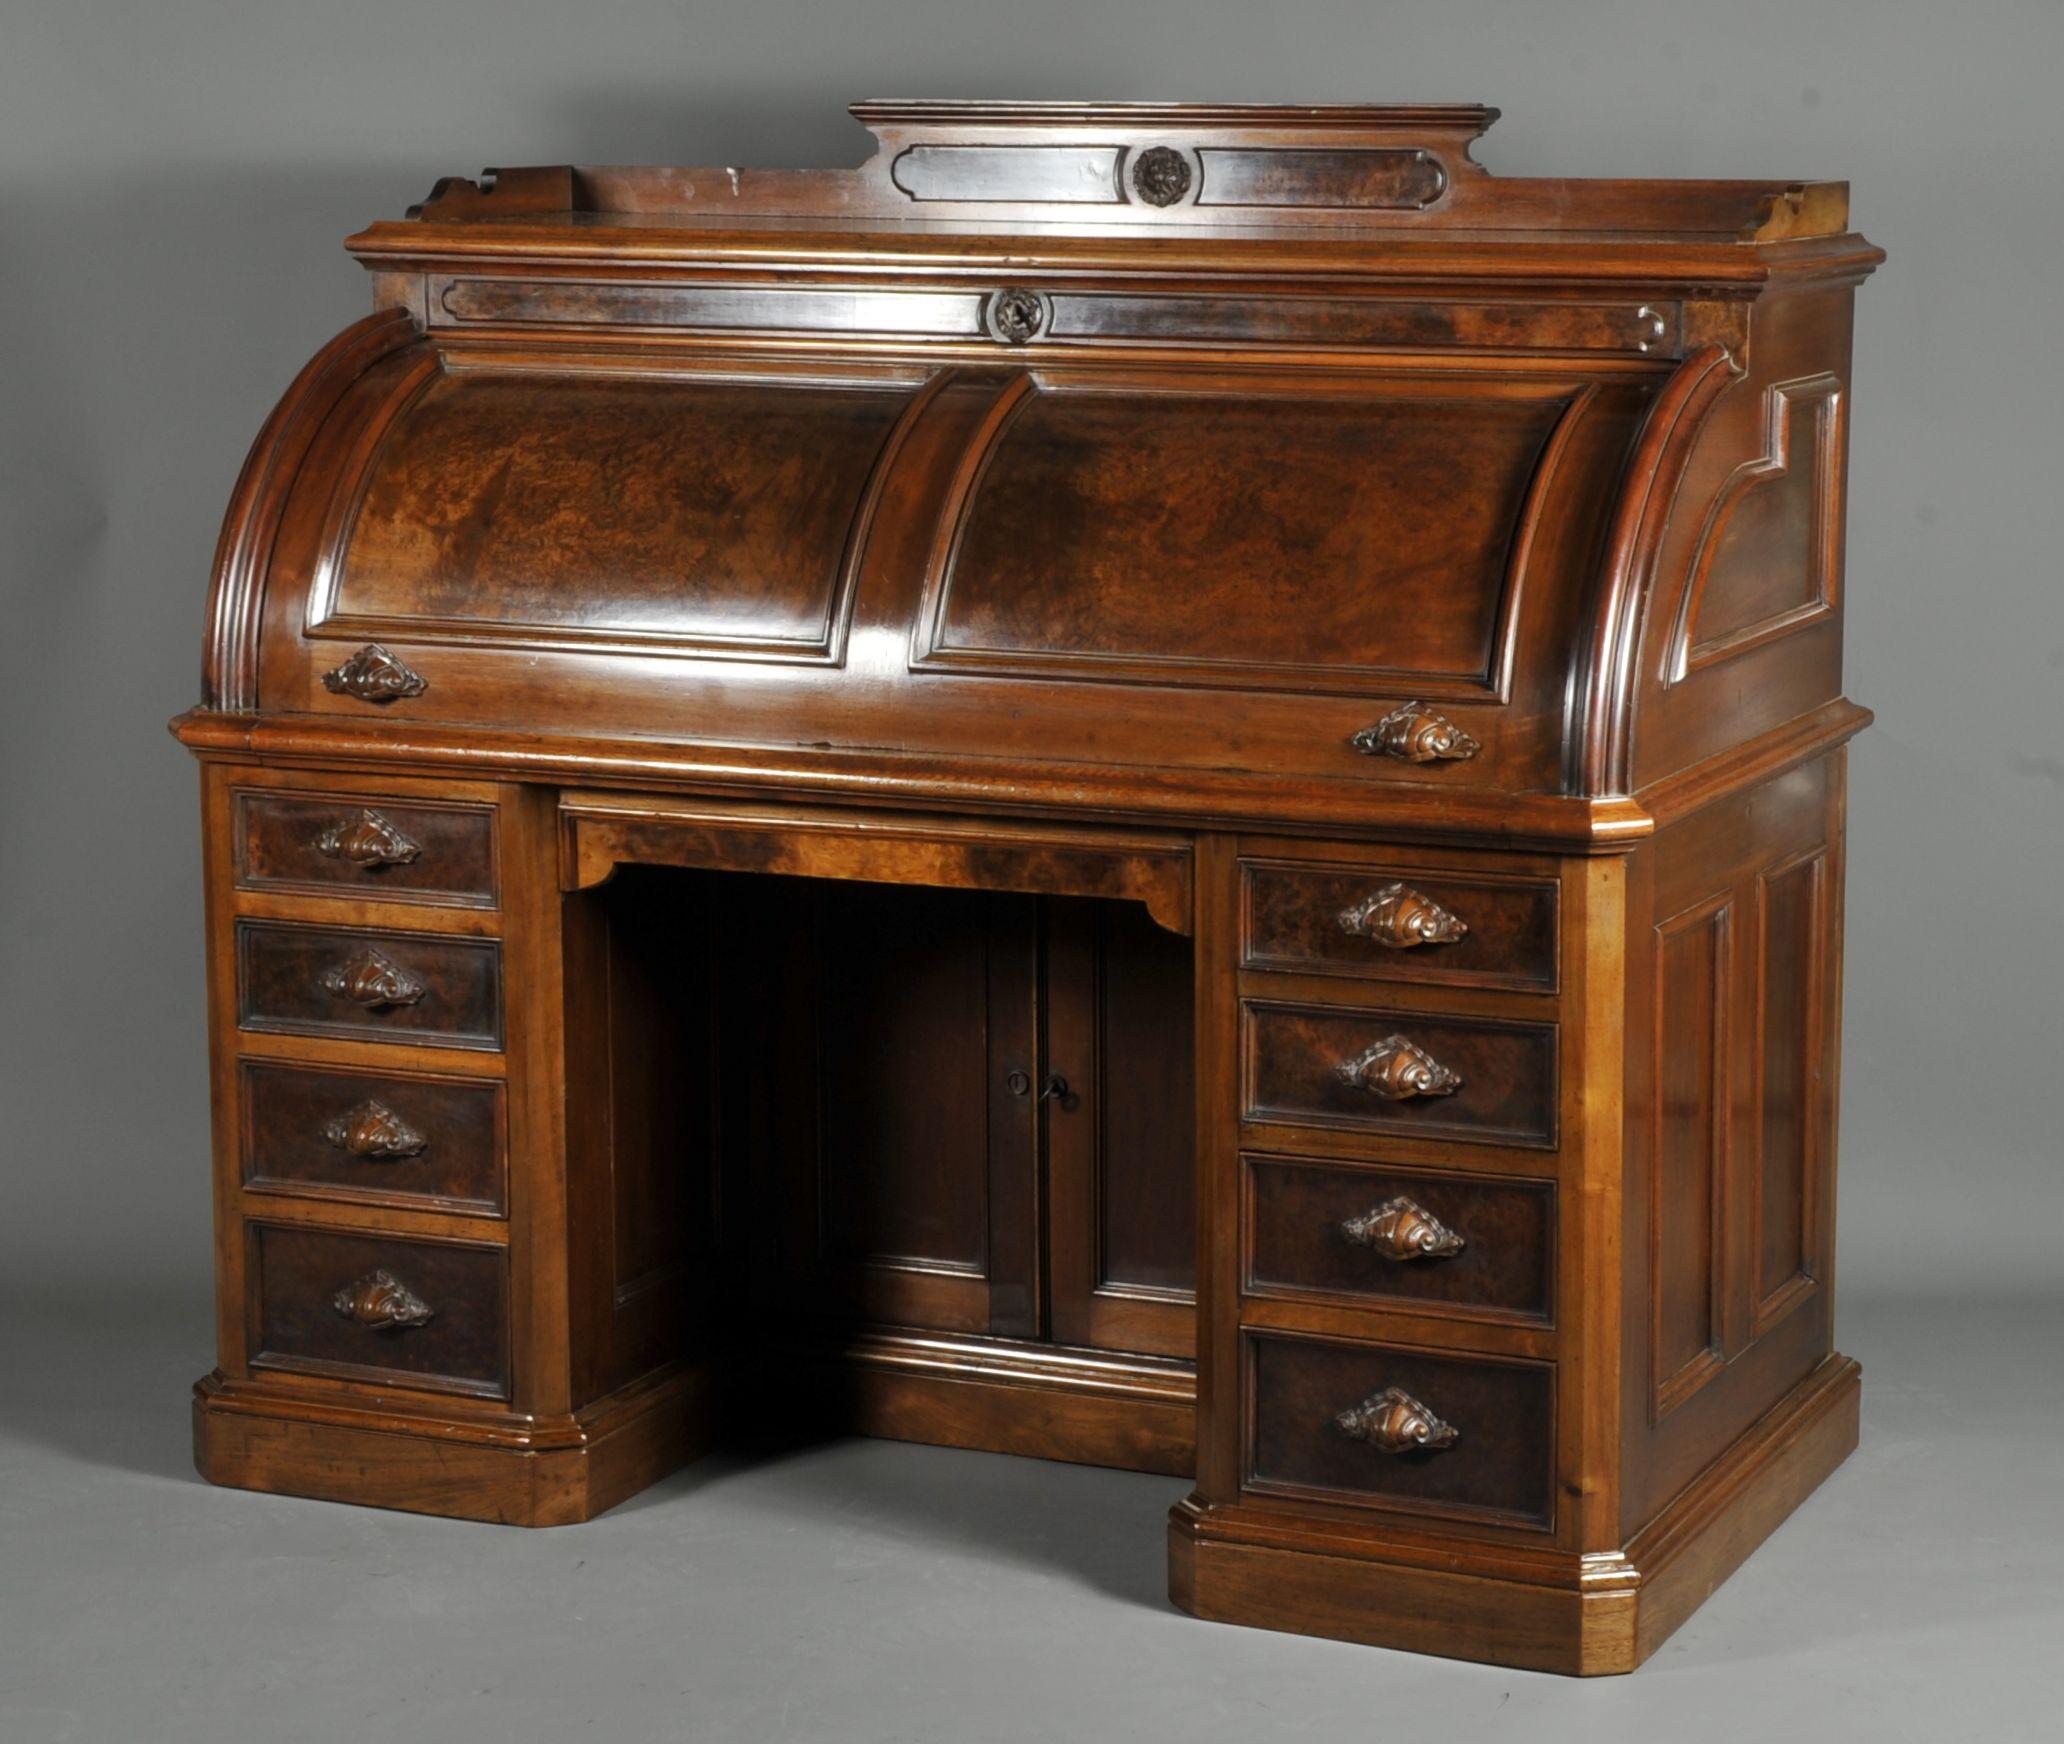 Magnificent and very imposing Napoleon III cylinder secretary made of burl walnut and solid walnut.

Mounted on plinths, it has eight drawers in front and a large cylinder opening a very beautiful theater composed of a folding top covered with